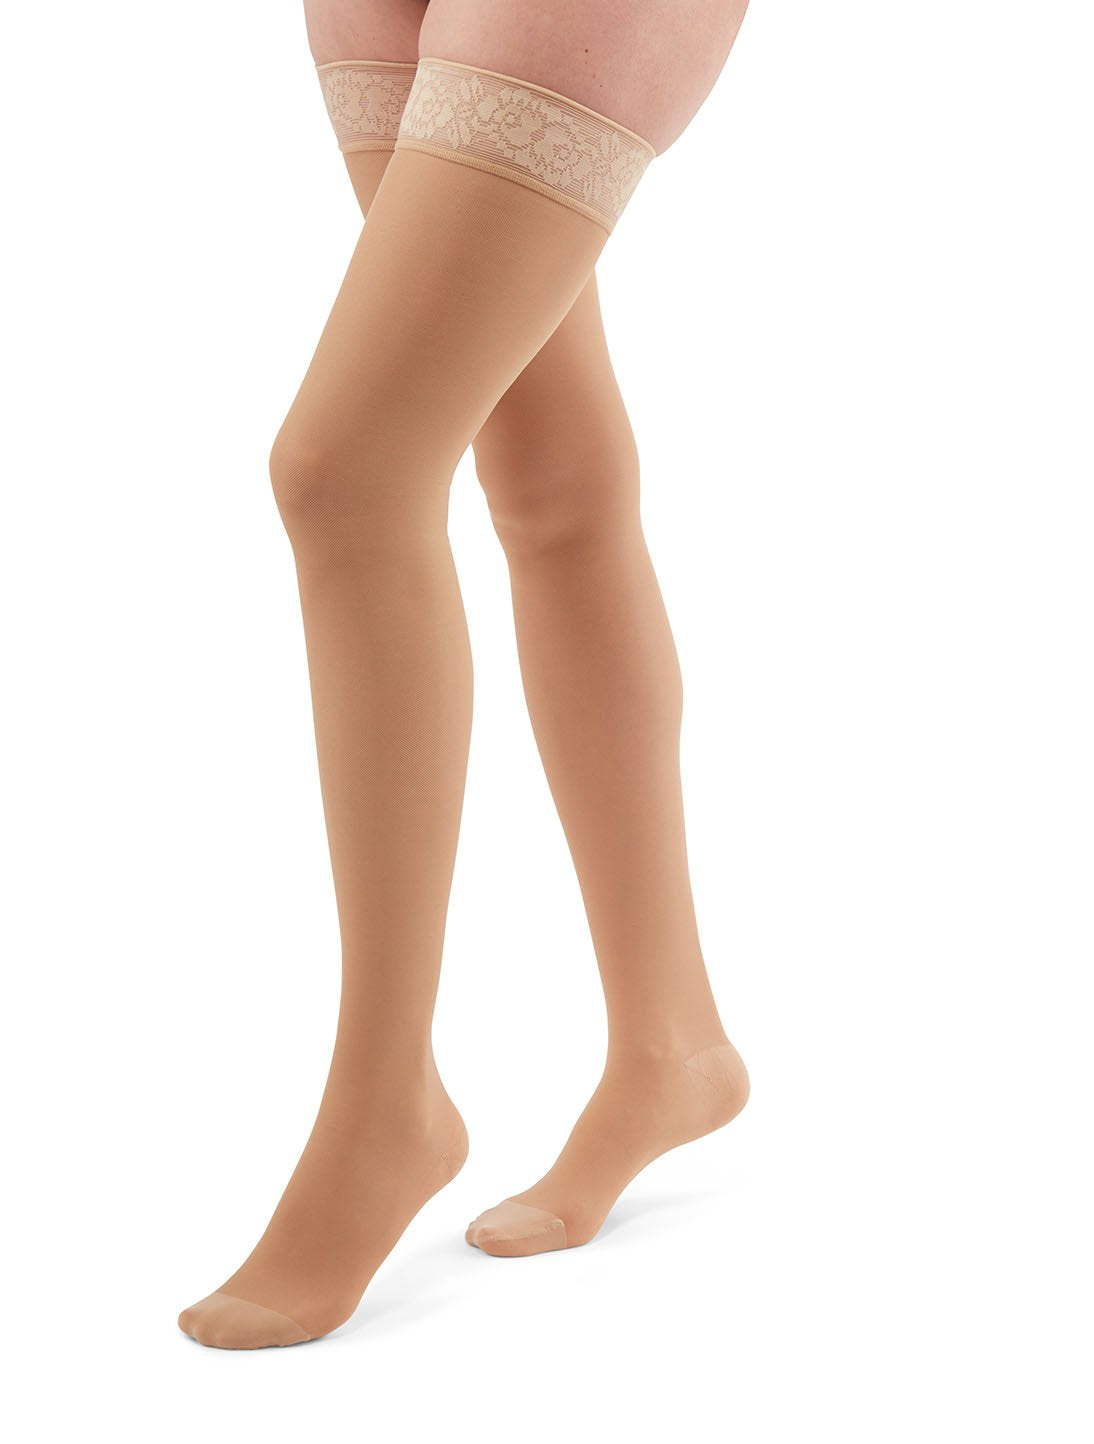 duomed transparent 15-20 mmHg thigh lace topband closed toe standard